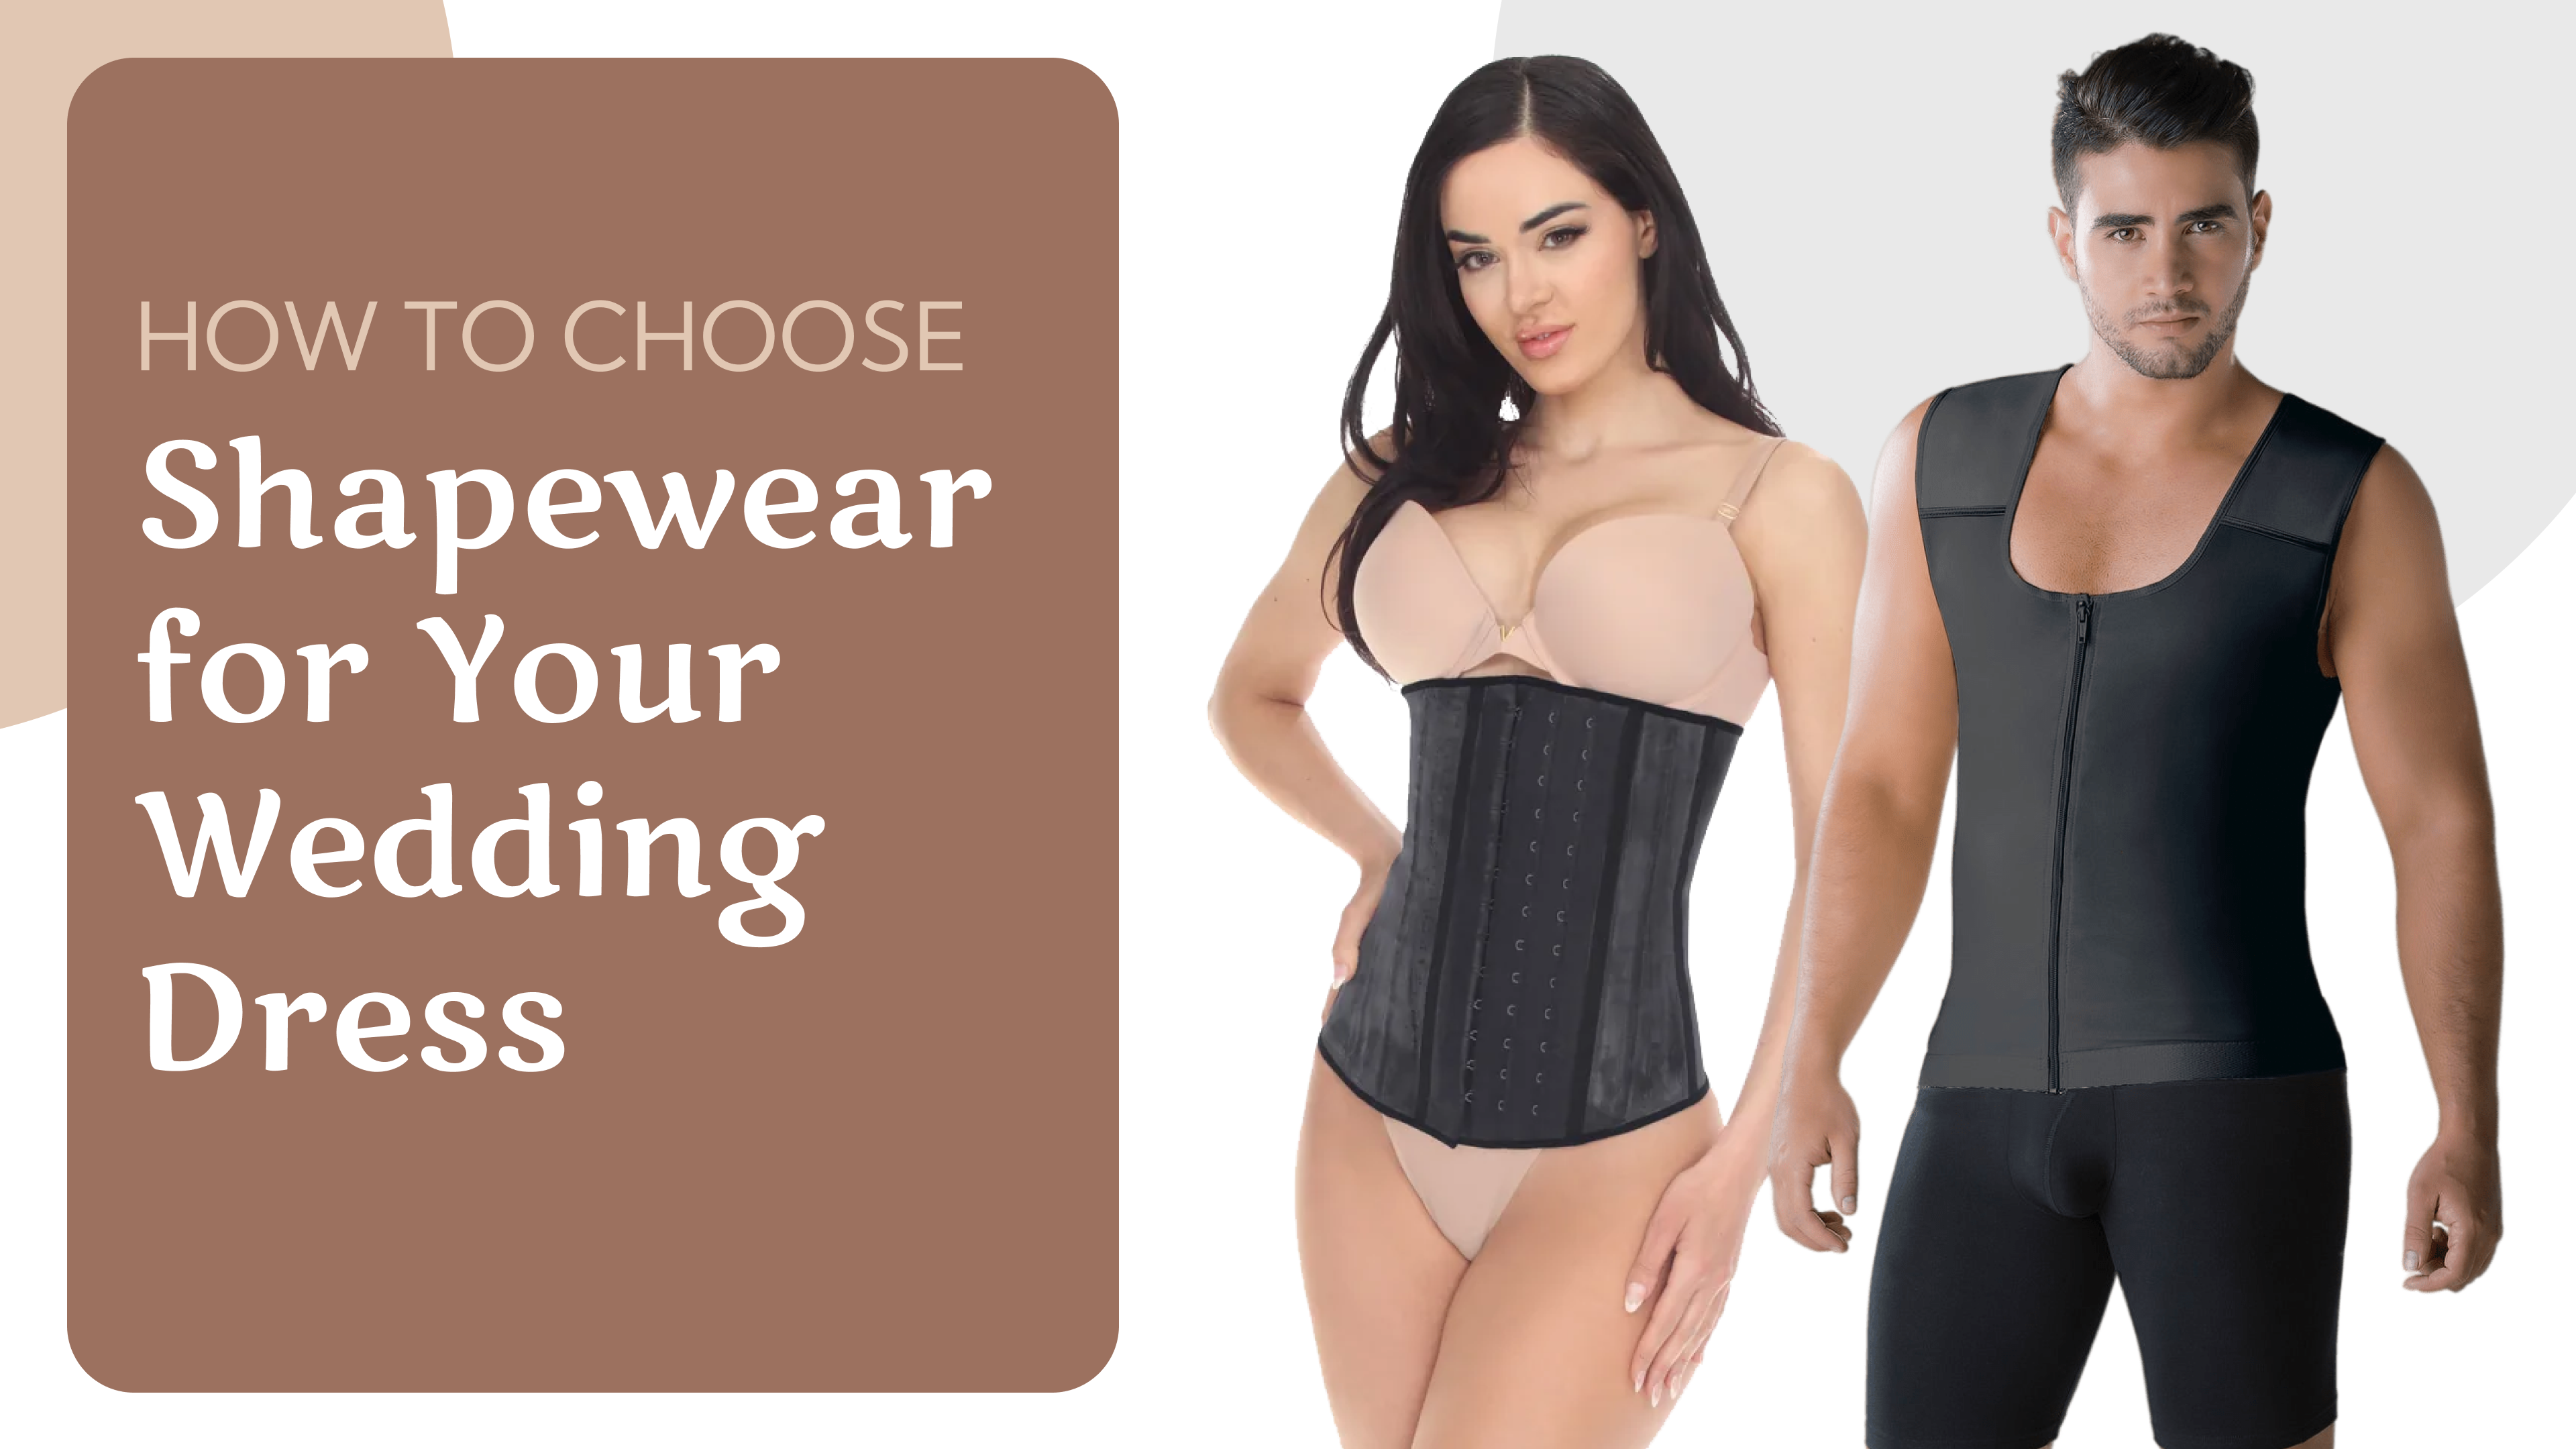 How to Choose Shapewear for Your Wedding Dress